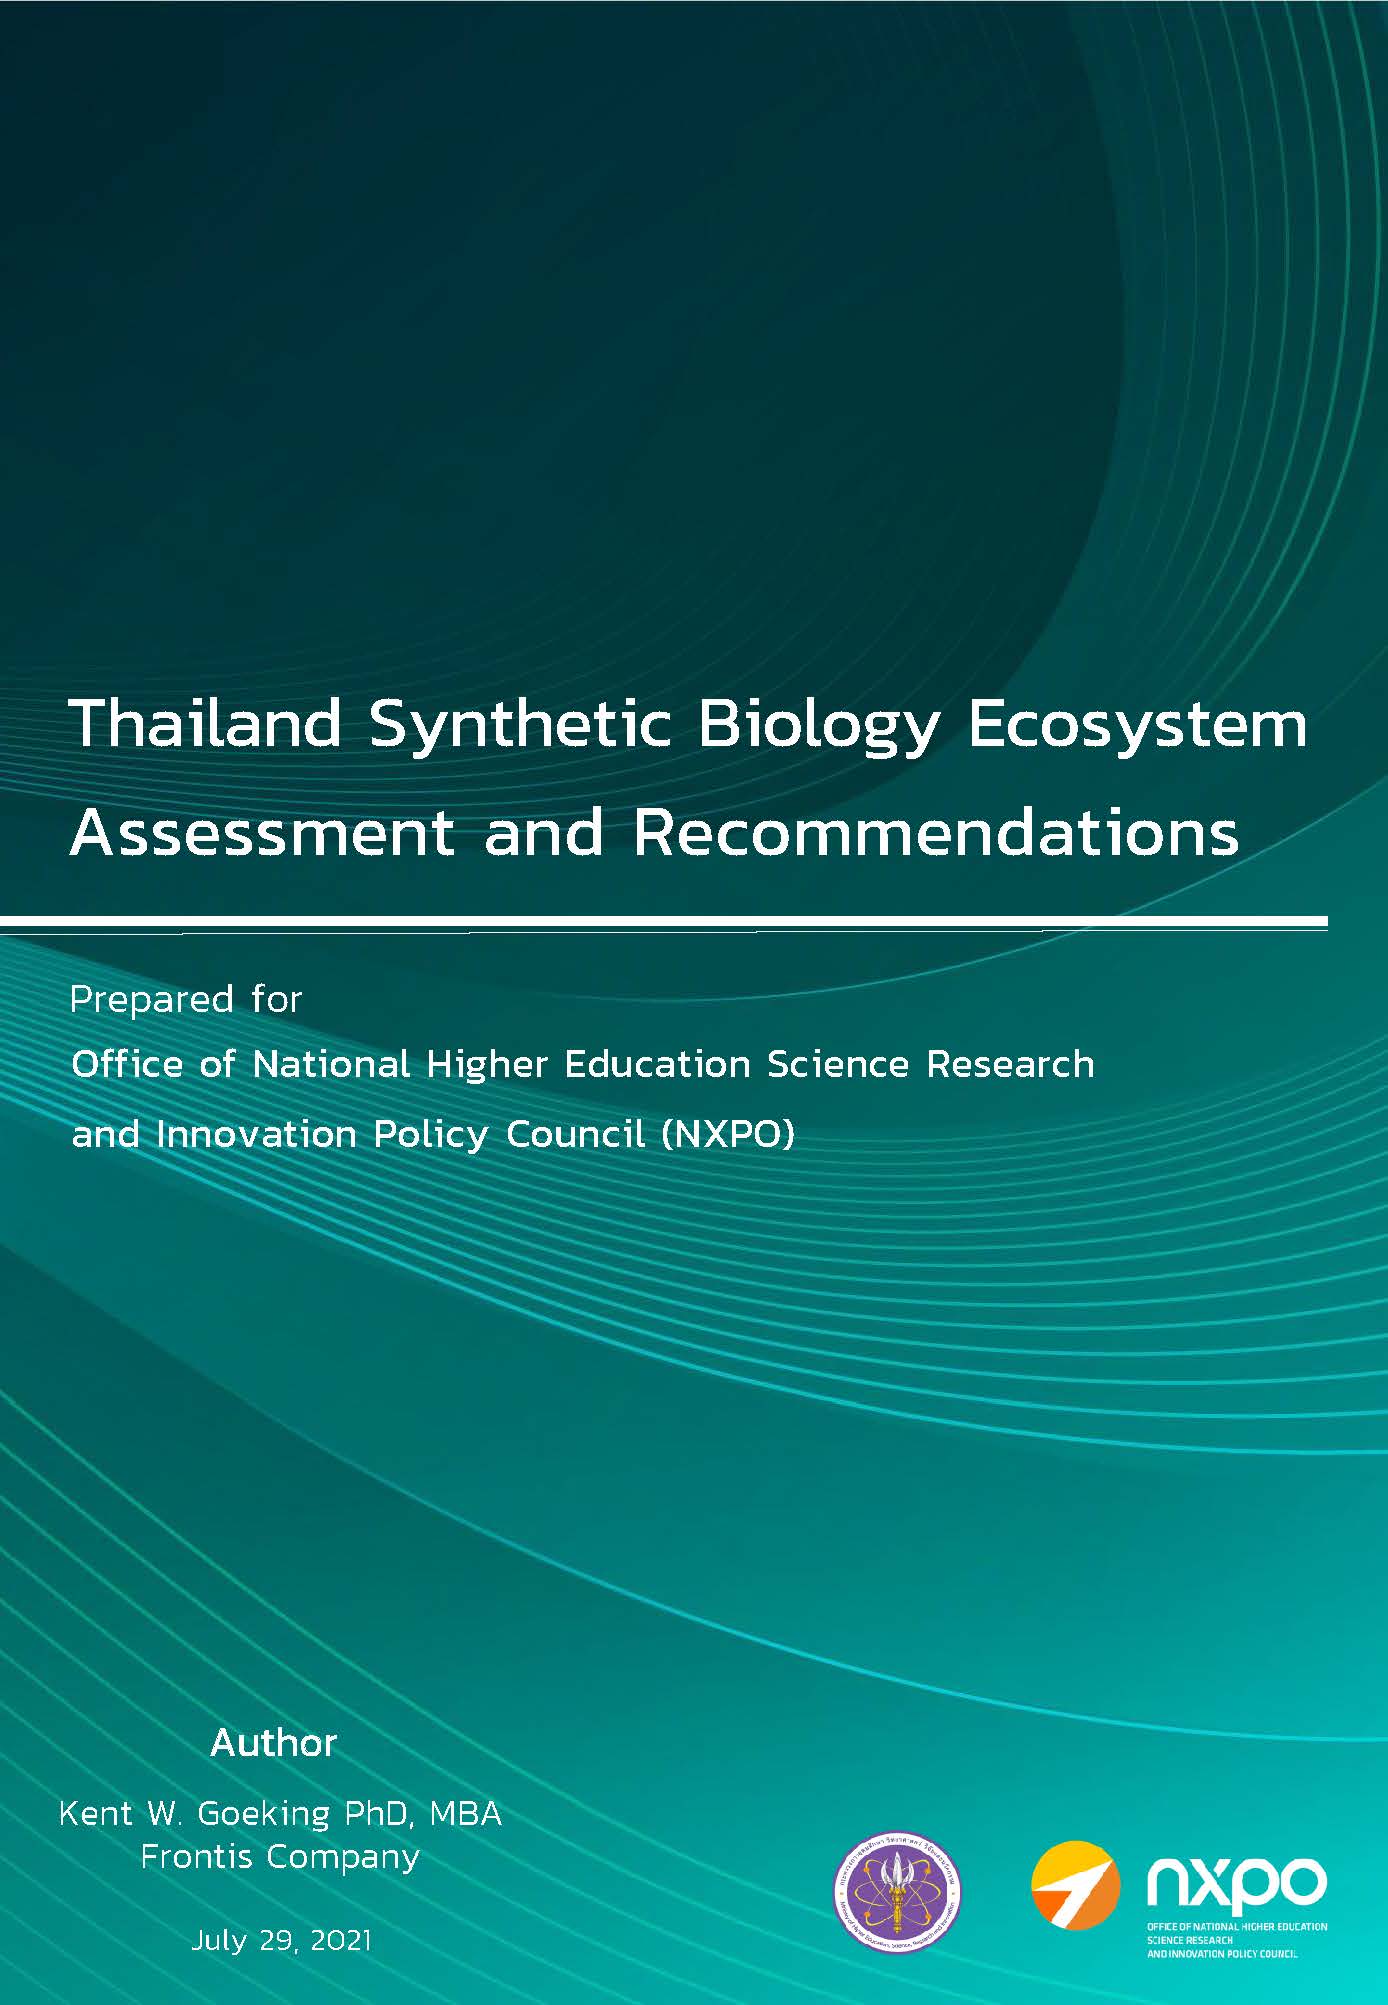 Thailand Synthetic Biology Ecosystem Assessment and Recommendations